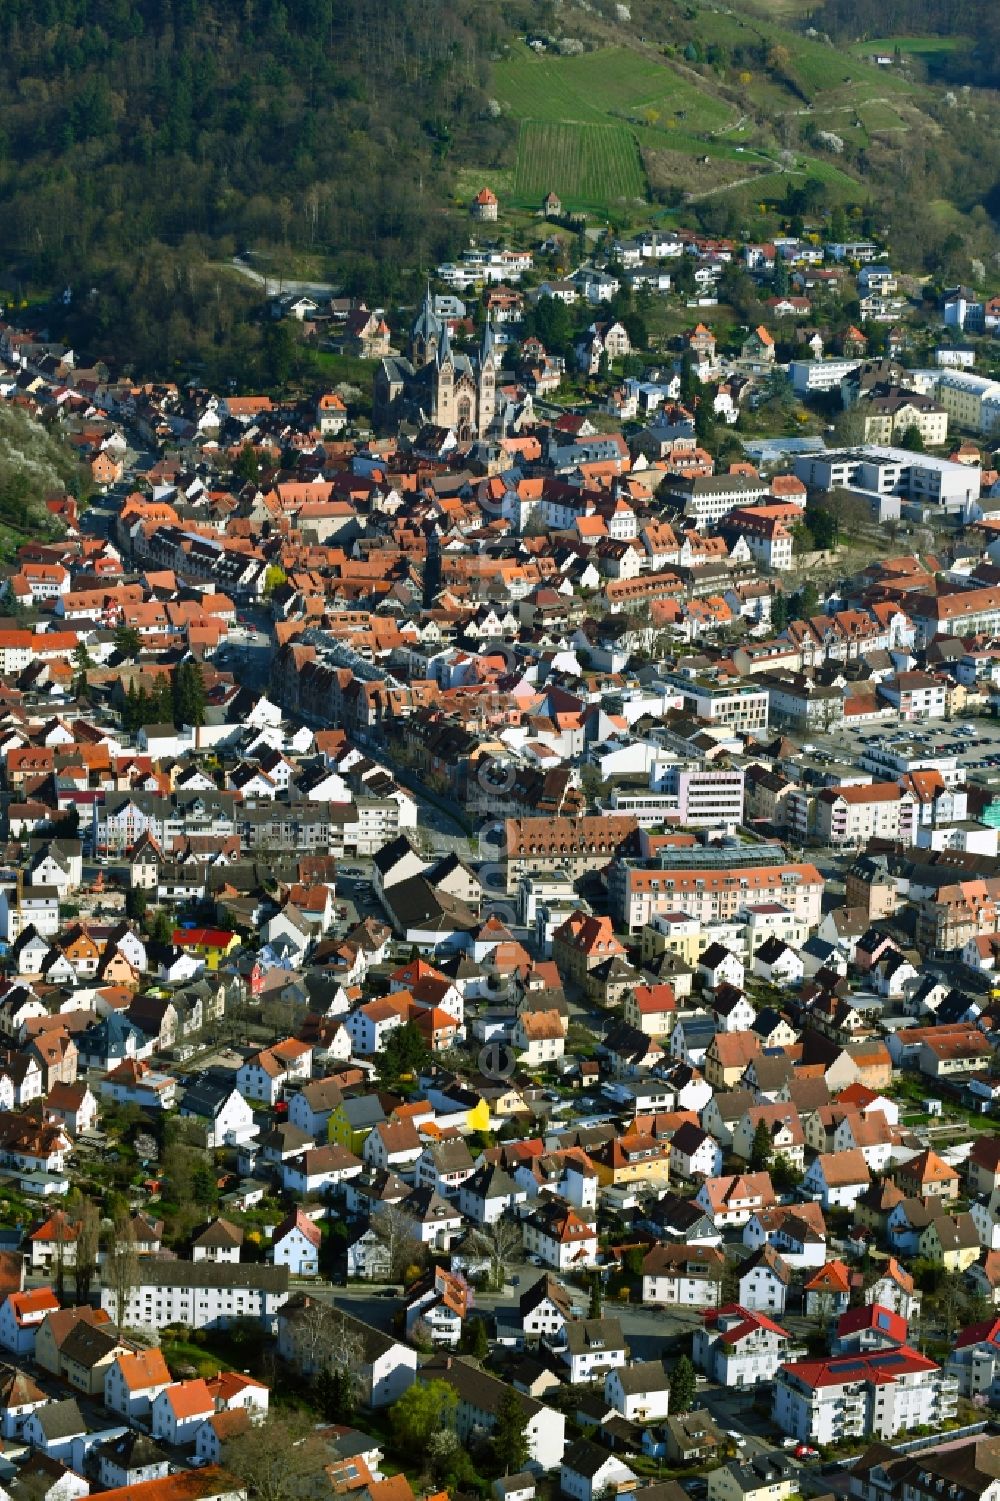 Heppenheim (Bergstraße) from above - Location view of the streets and houses of residential areas in the valley landscape surrounded by mountains in Heppenheim (Bergstrasse) in the state Hesse, Germany